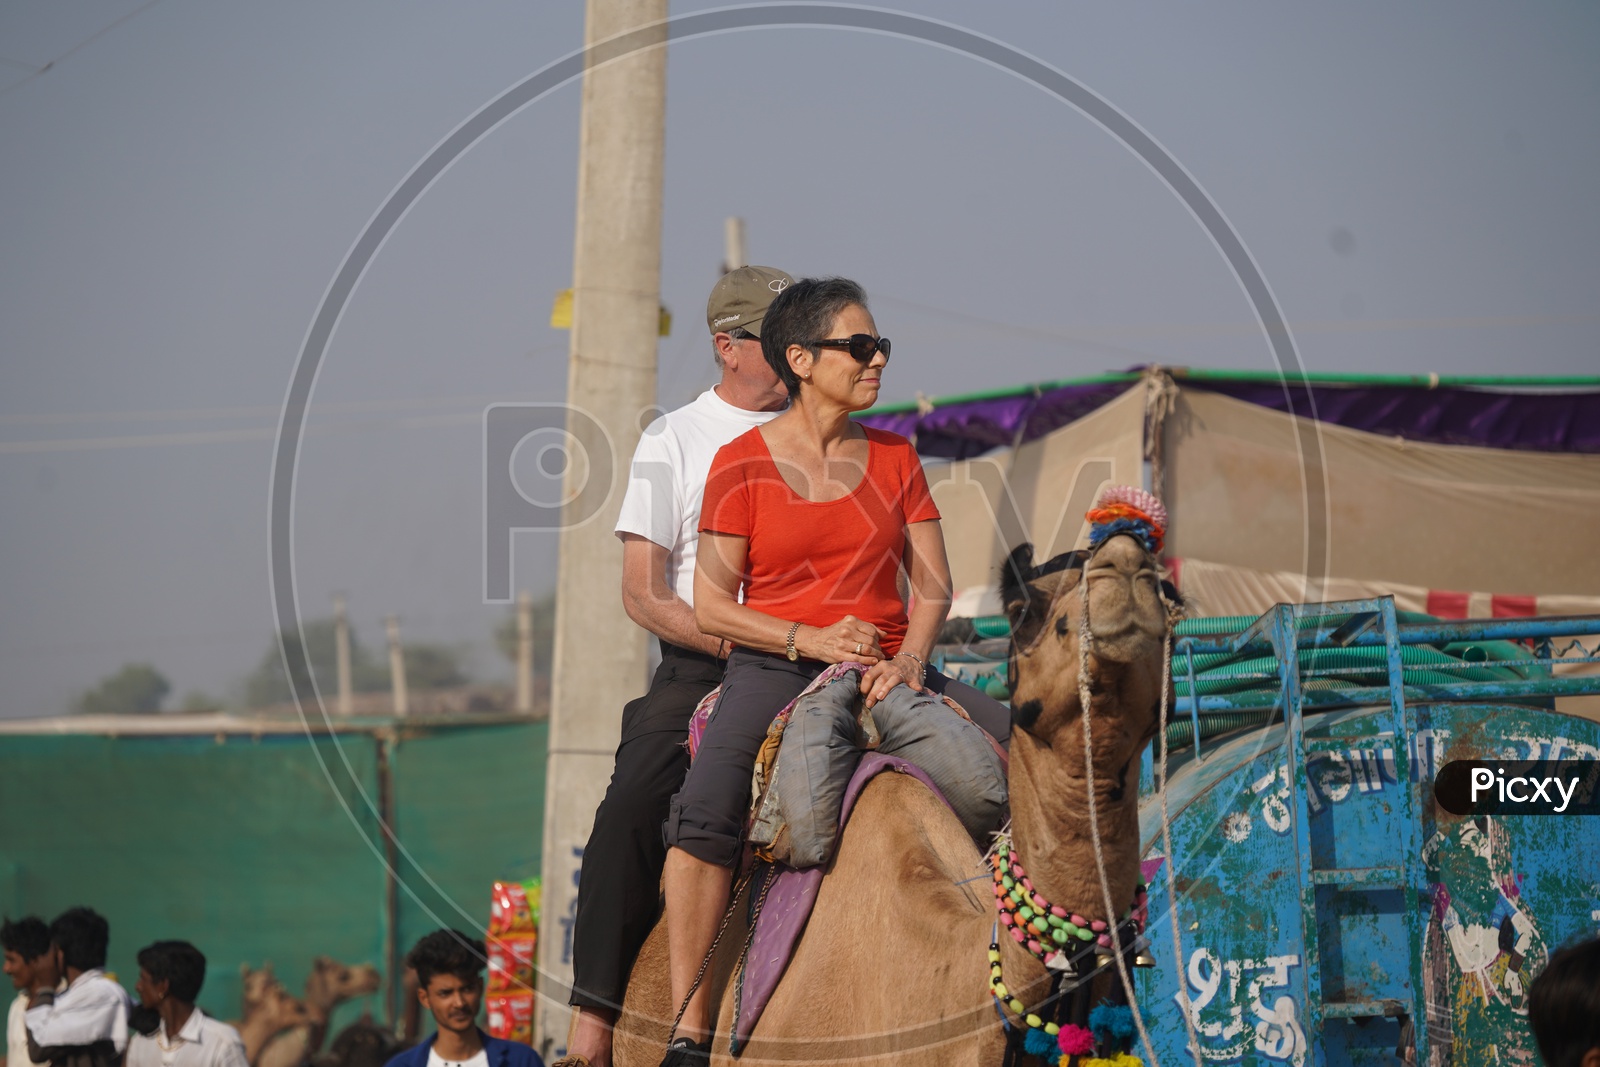 Foreigners Riding on Camels  in Pushkar Camel Fair